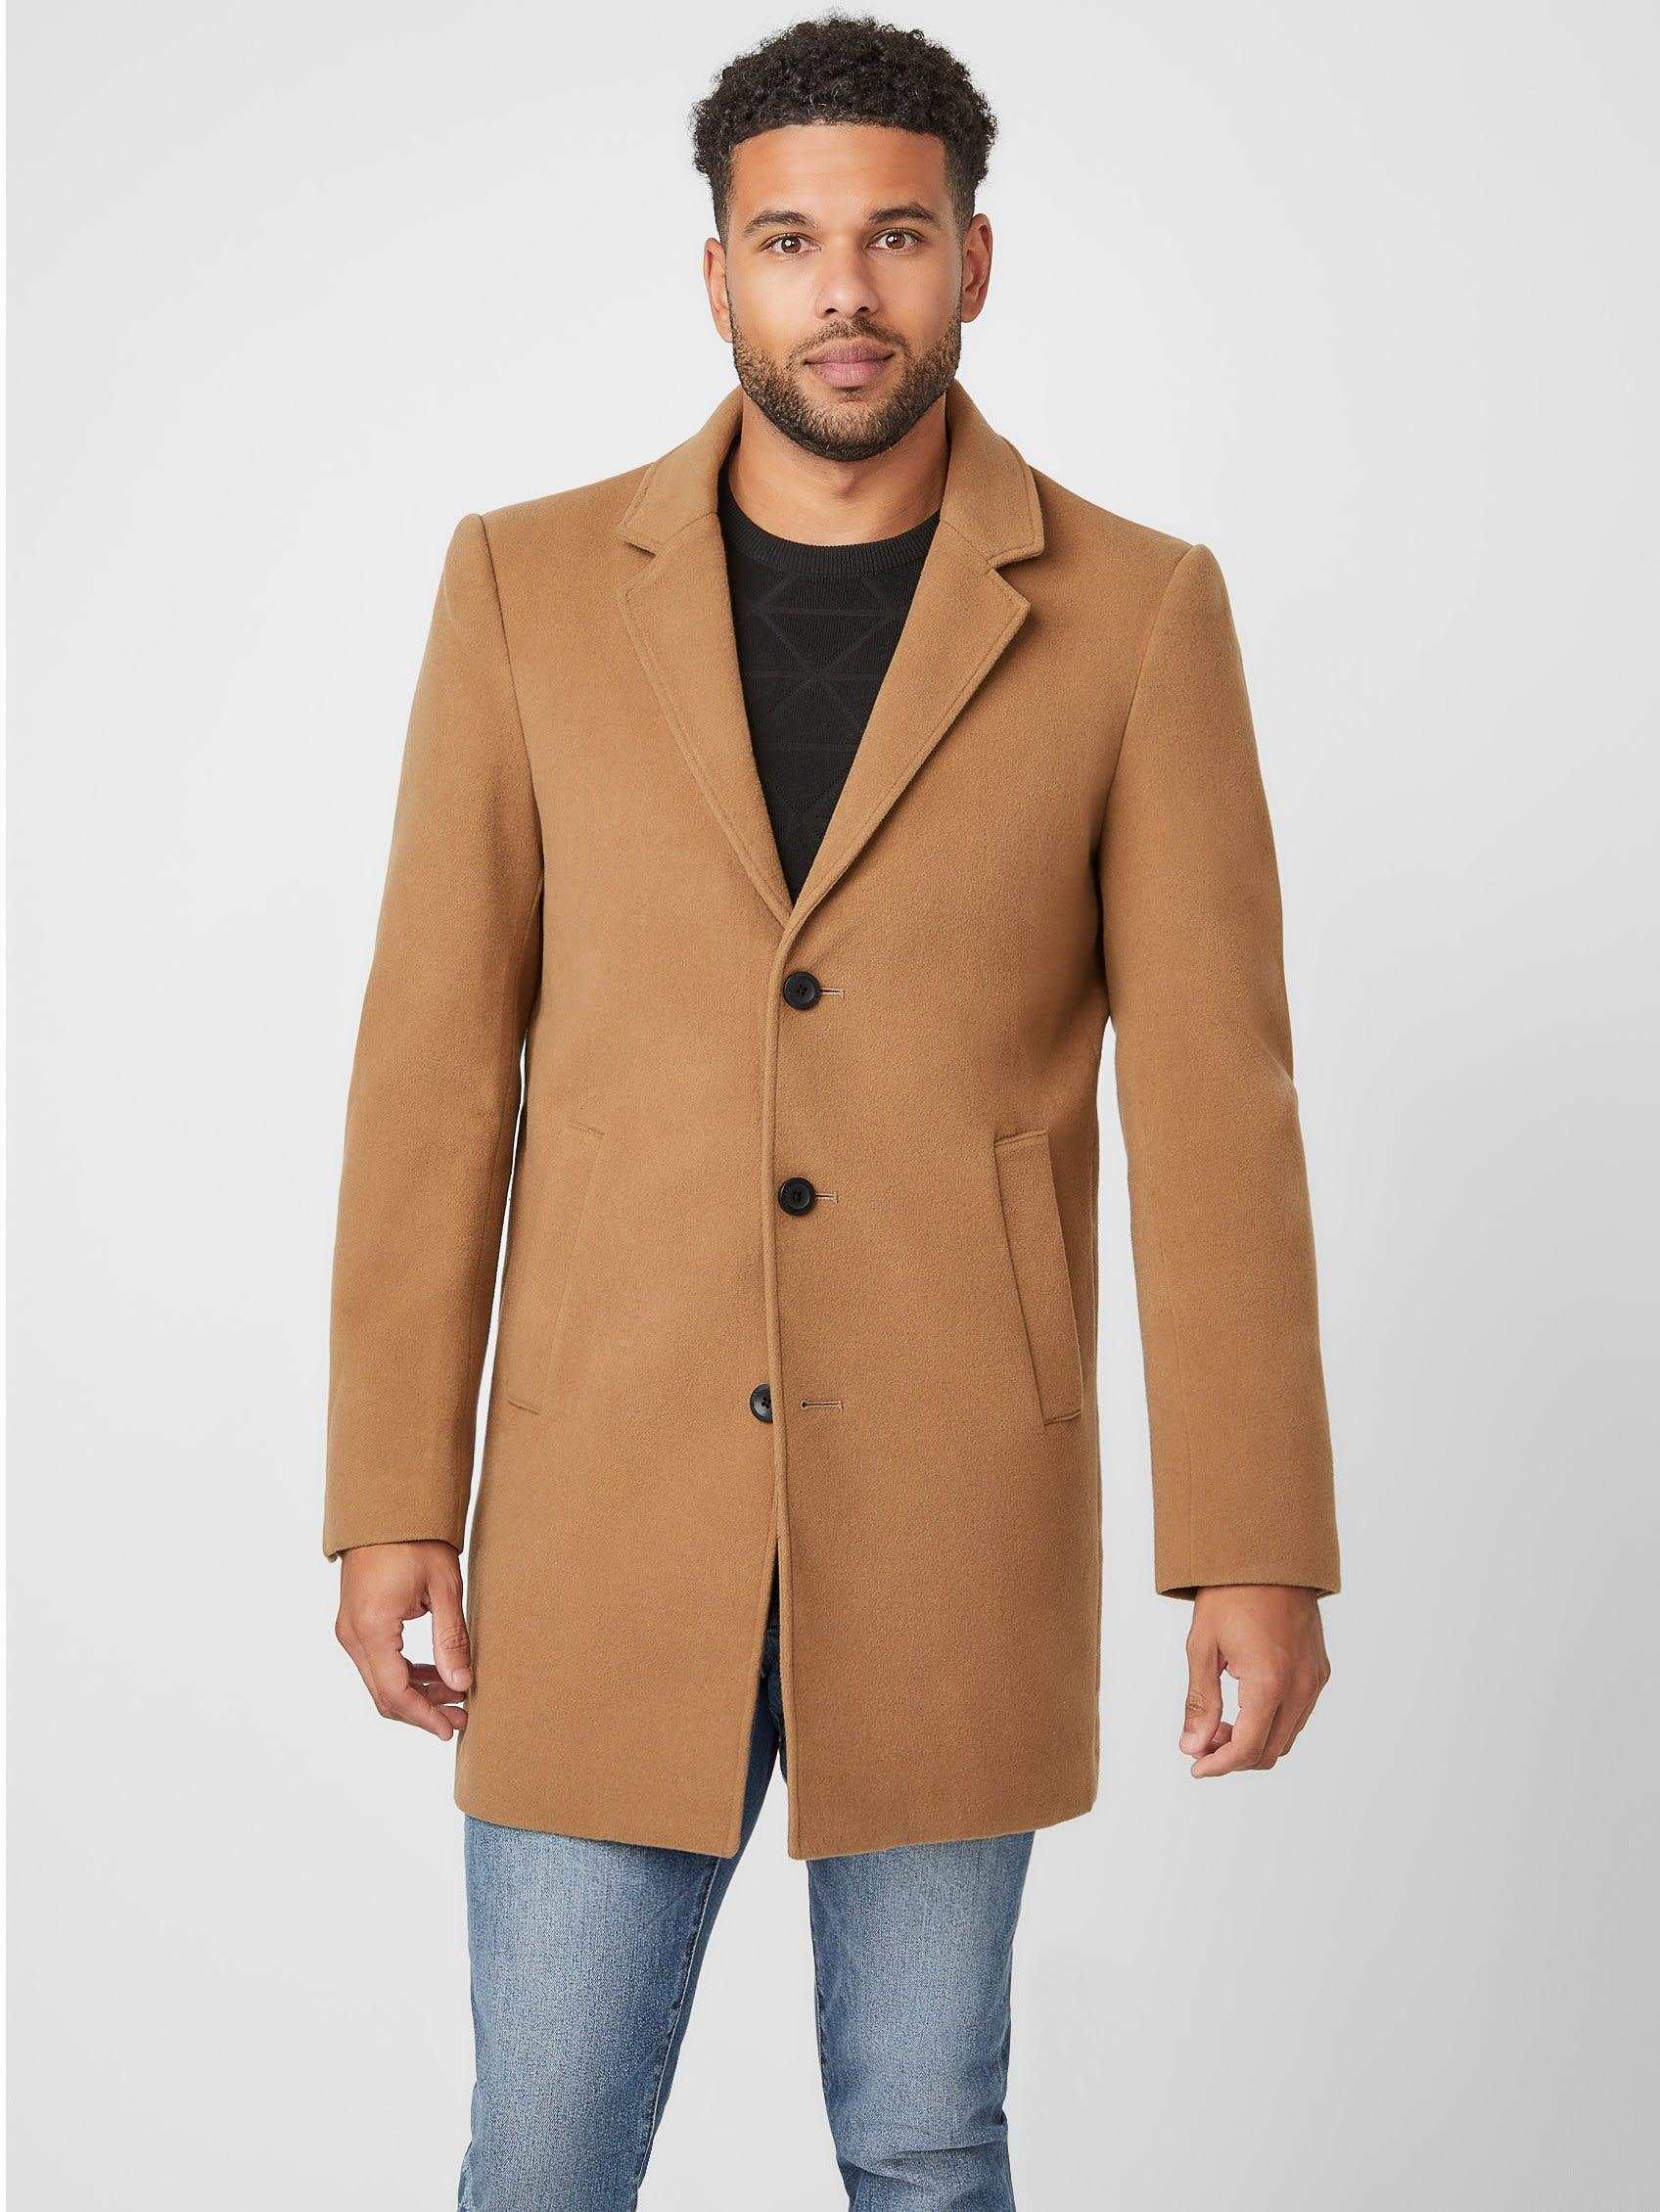 Guess Factory Lincoln Peacoat in Natural for Men | Lyst